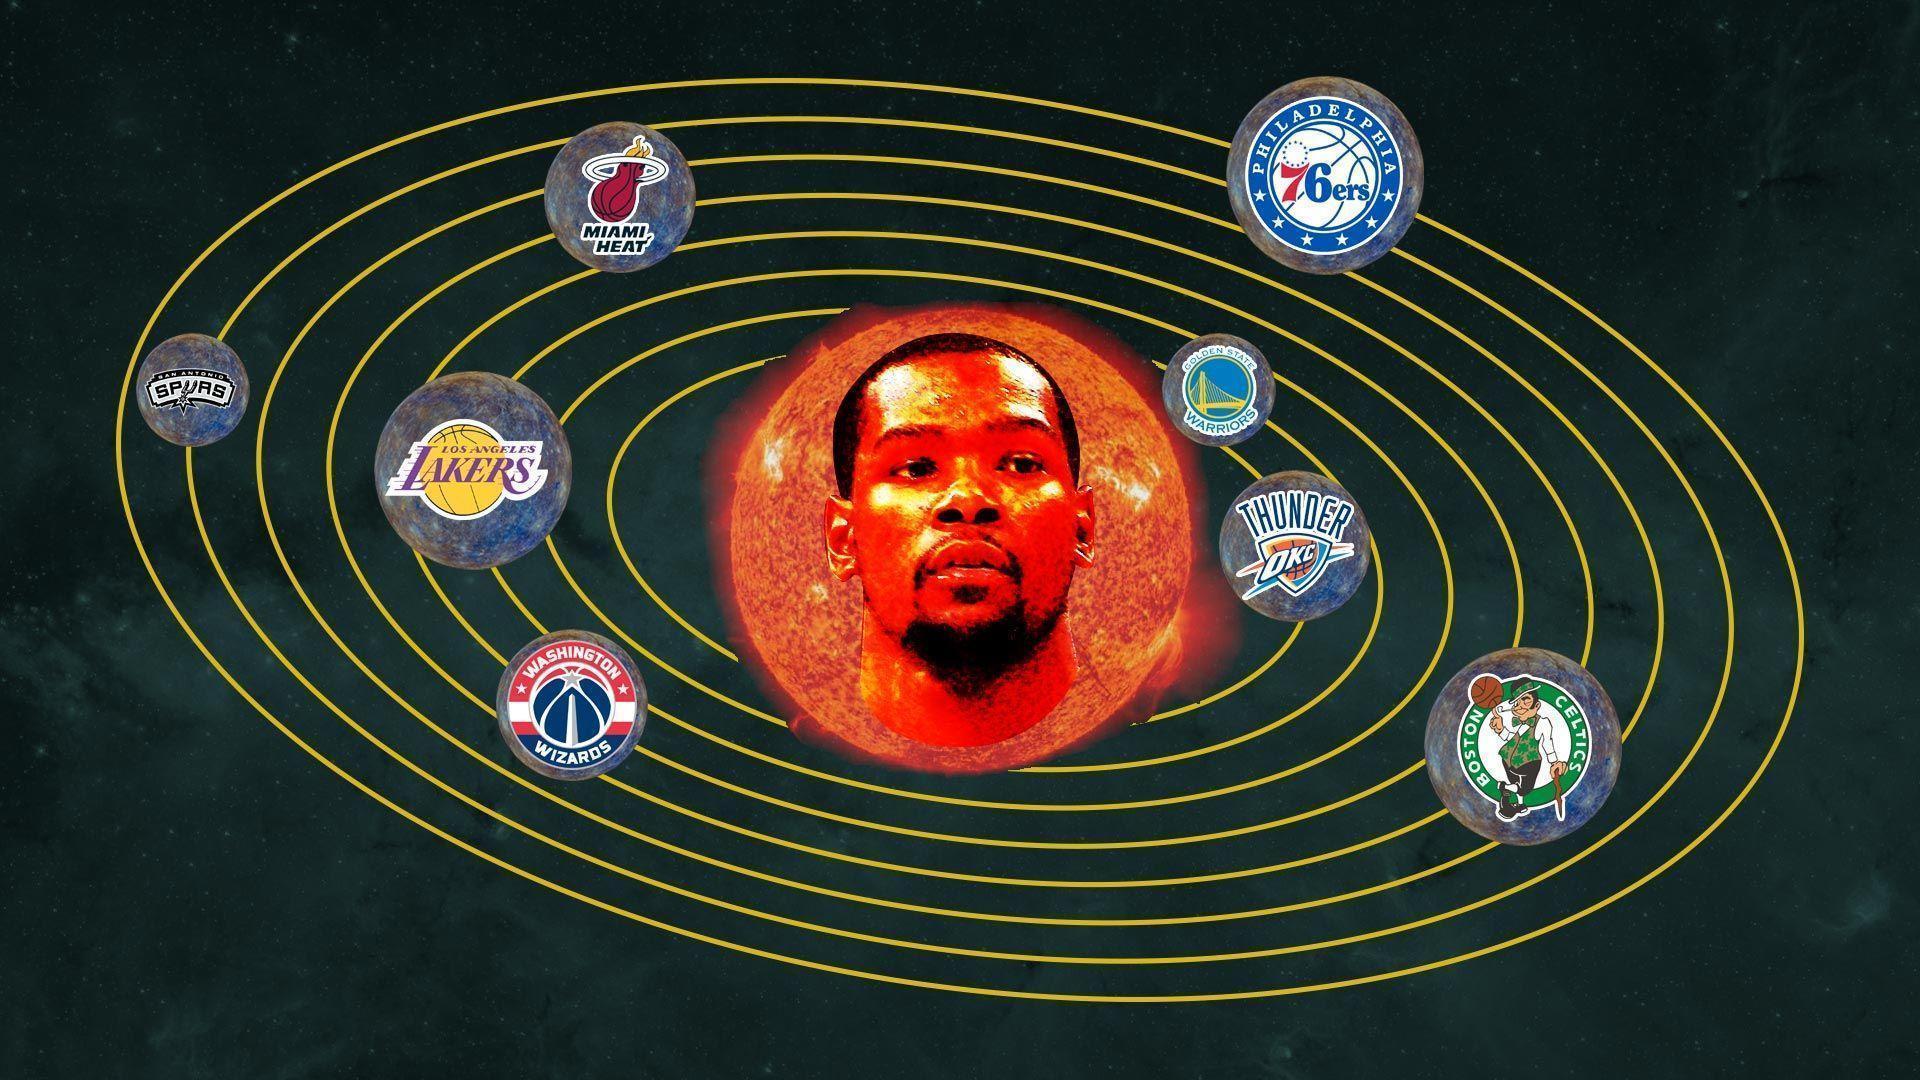 NBA space race: Here&;s what should happen in a $1 billion